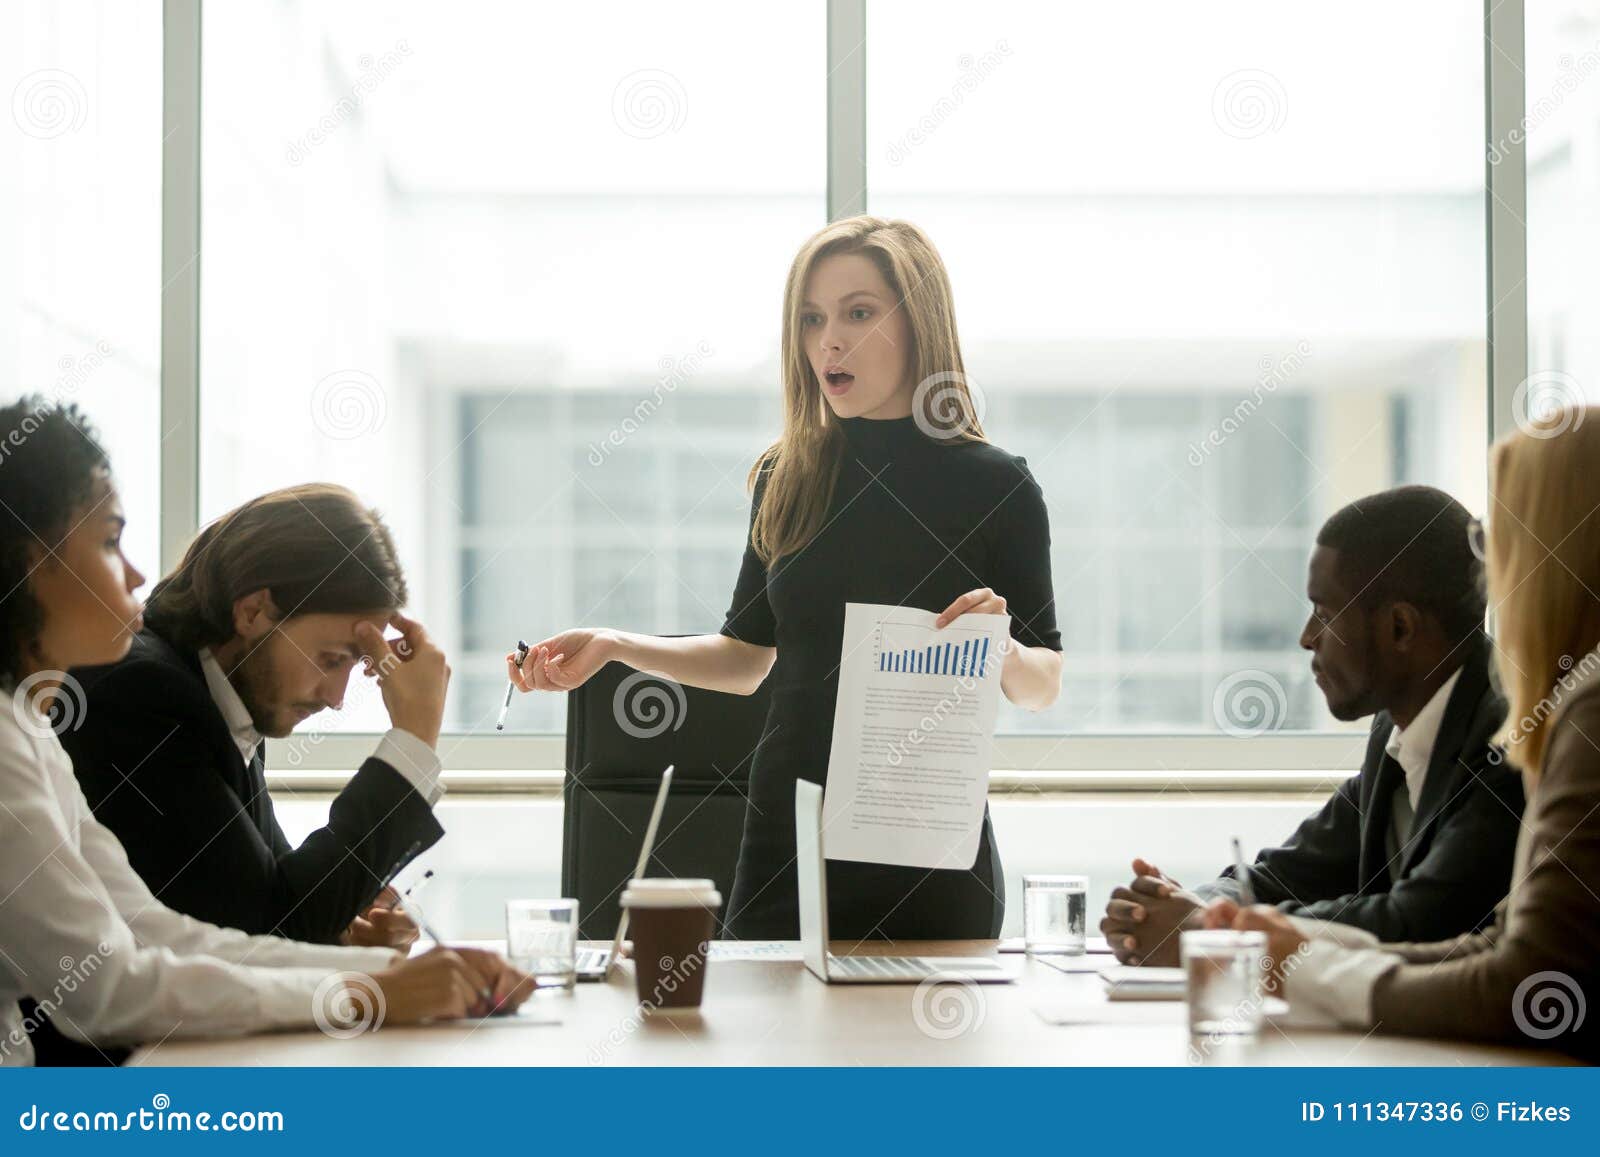 dissatisfied female executive scolding employees for bad work at